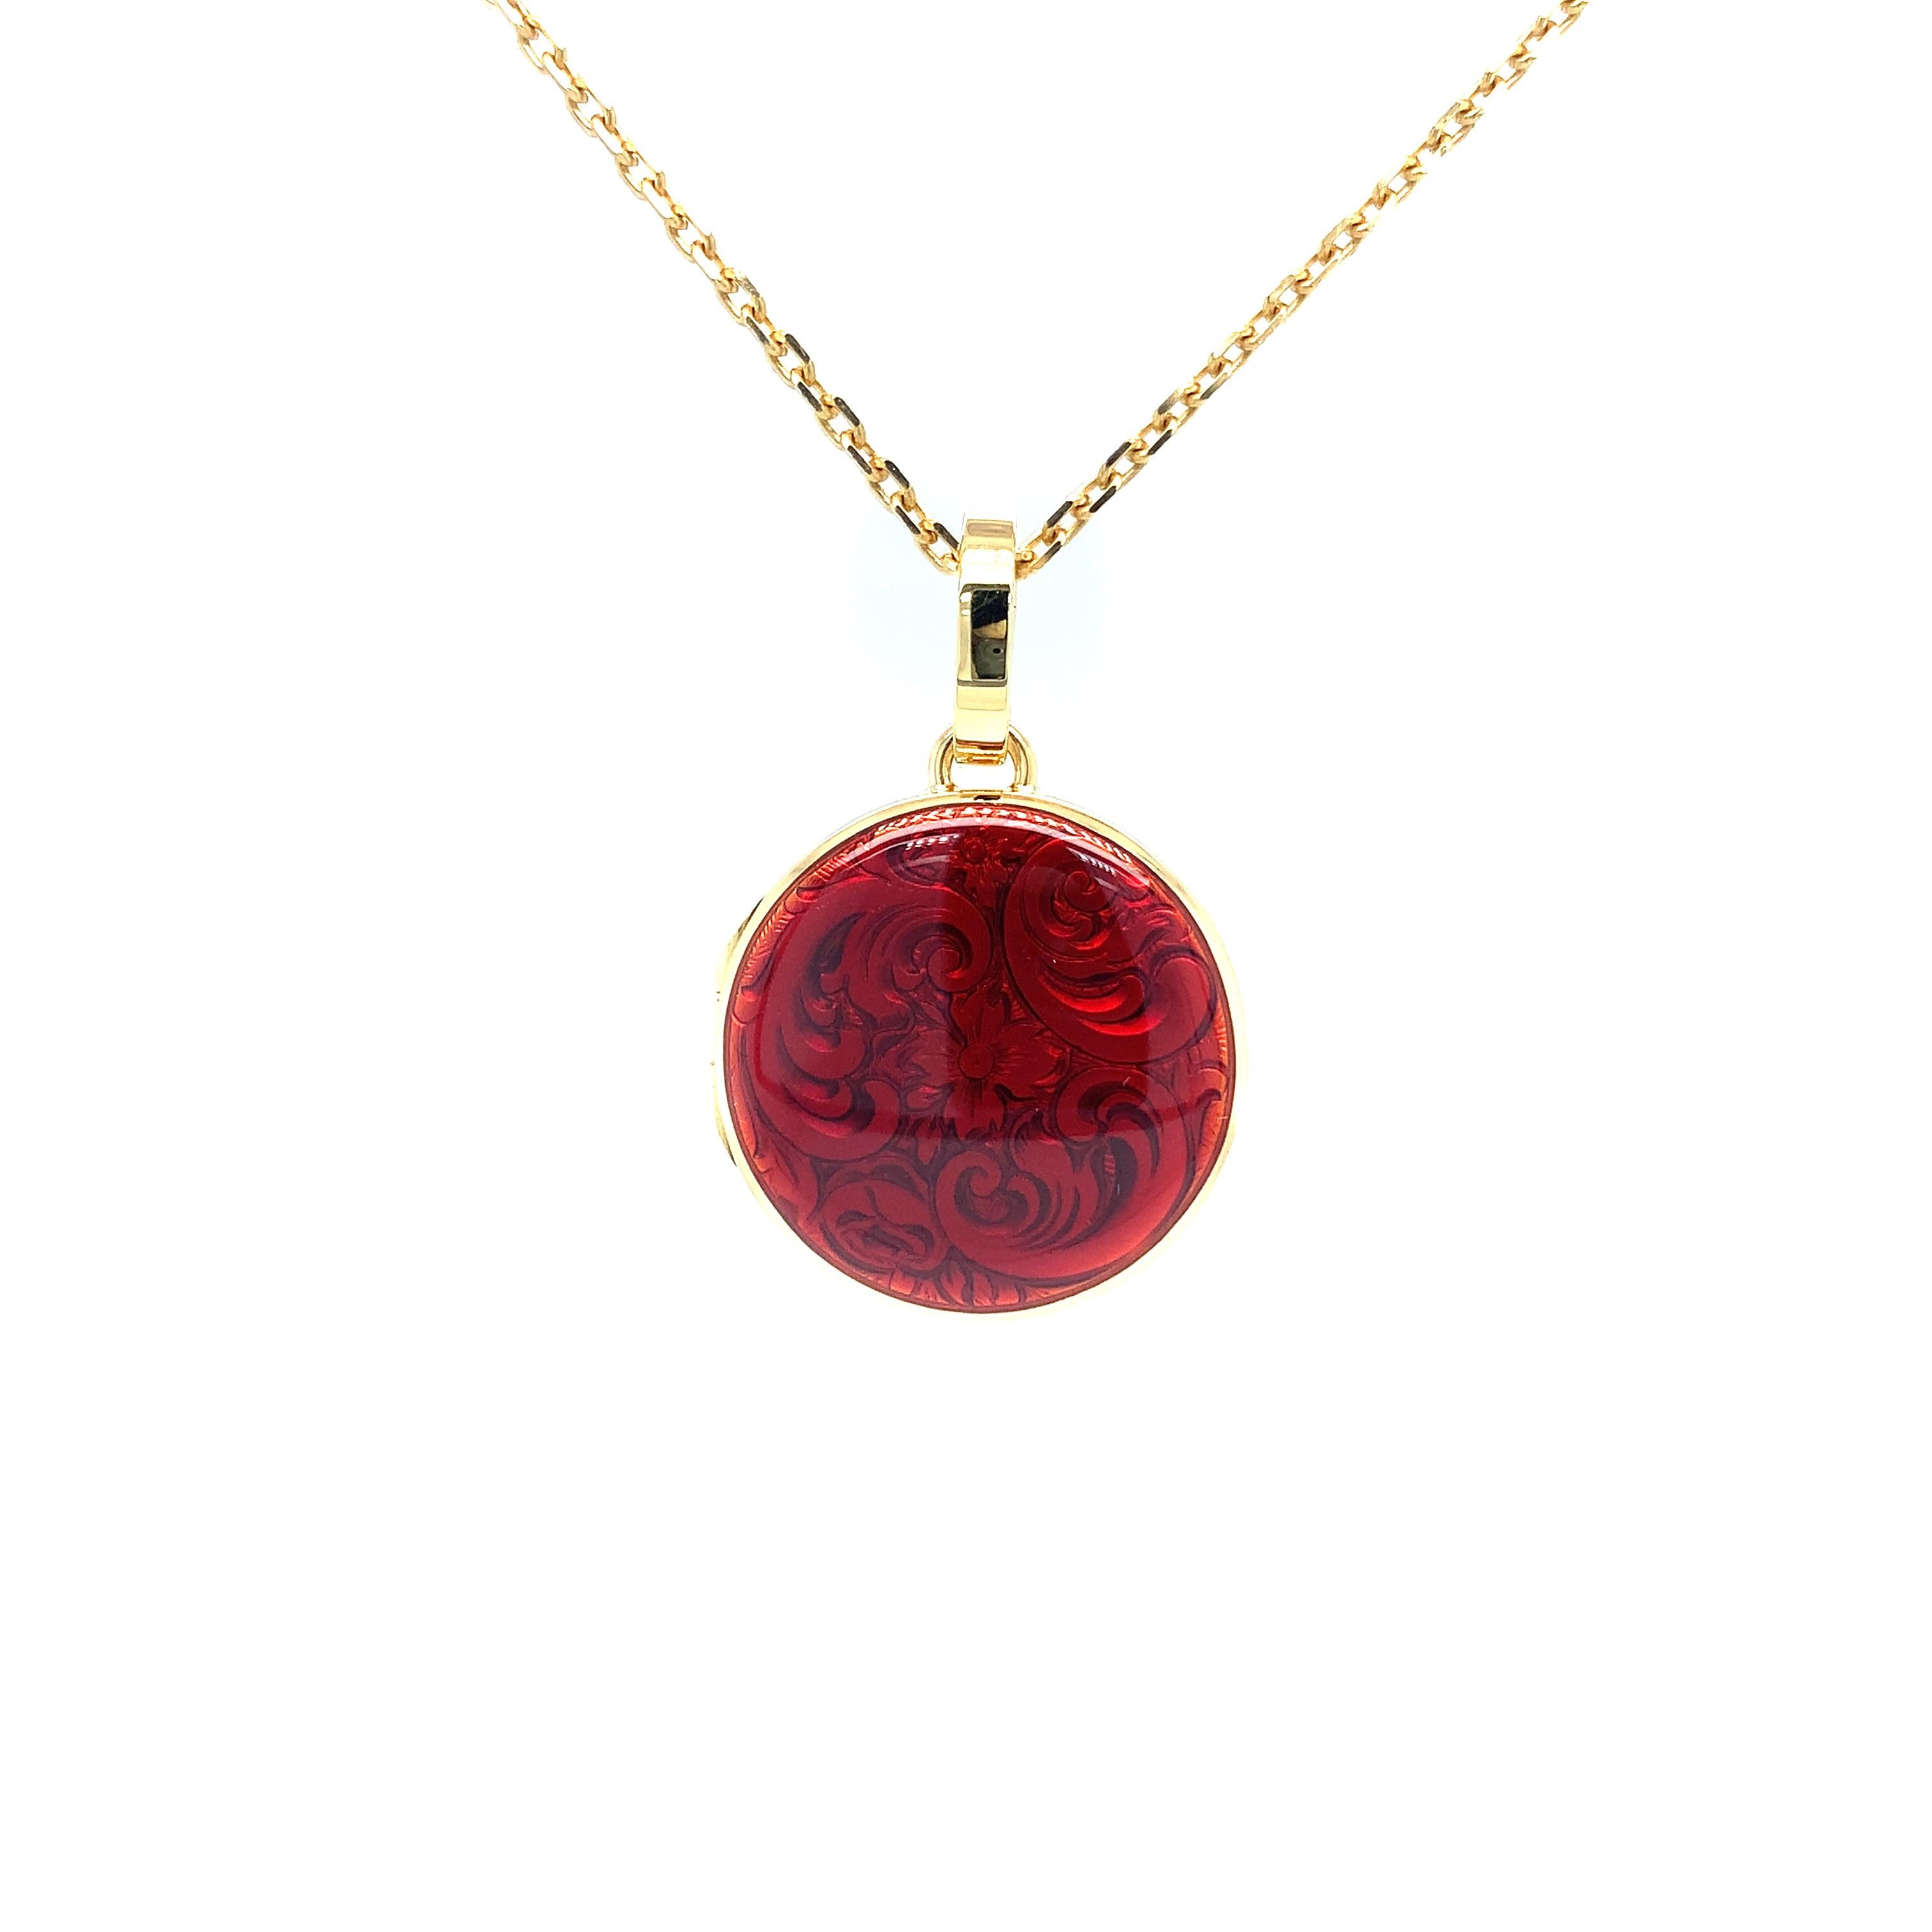 Round Locket Pendant Yellow Gold Red Vitreous Enamel over Scroll Engraving, Lobster Bail, Yellow Gold Chain 42 cm

About the creator Victor Mayer
Victor Mayer is internationally renowned for elegant timeless designs and unrivalled expertise in